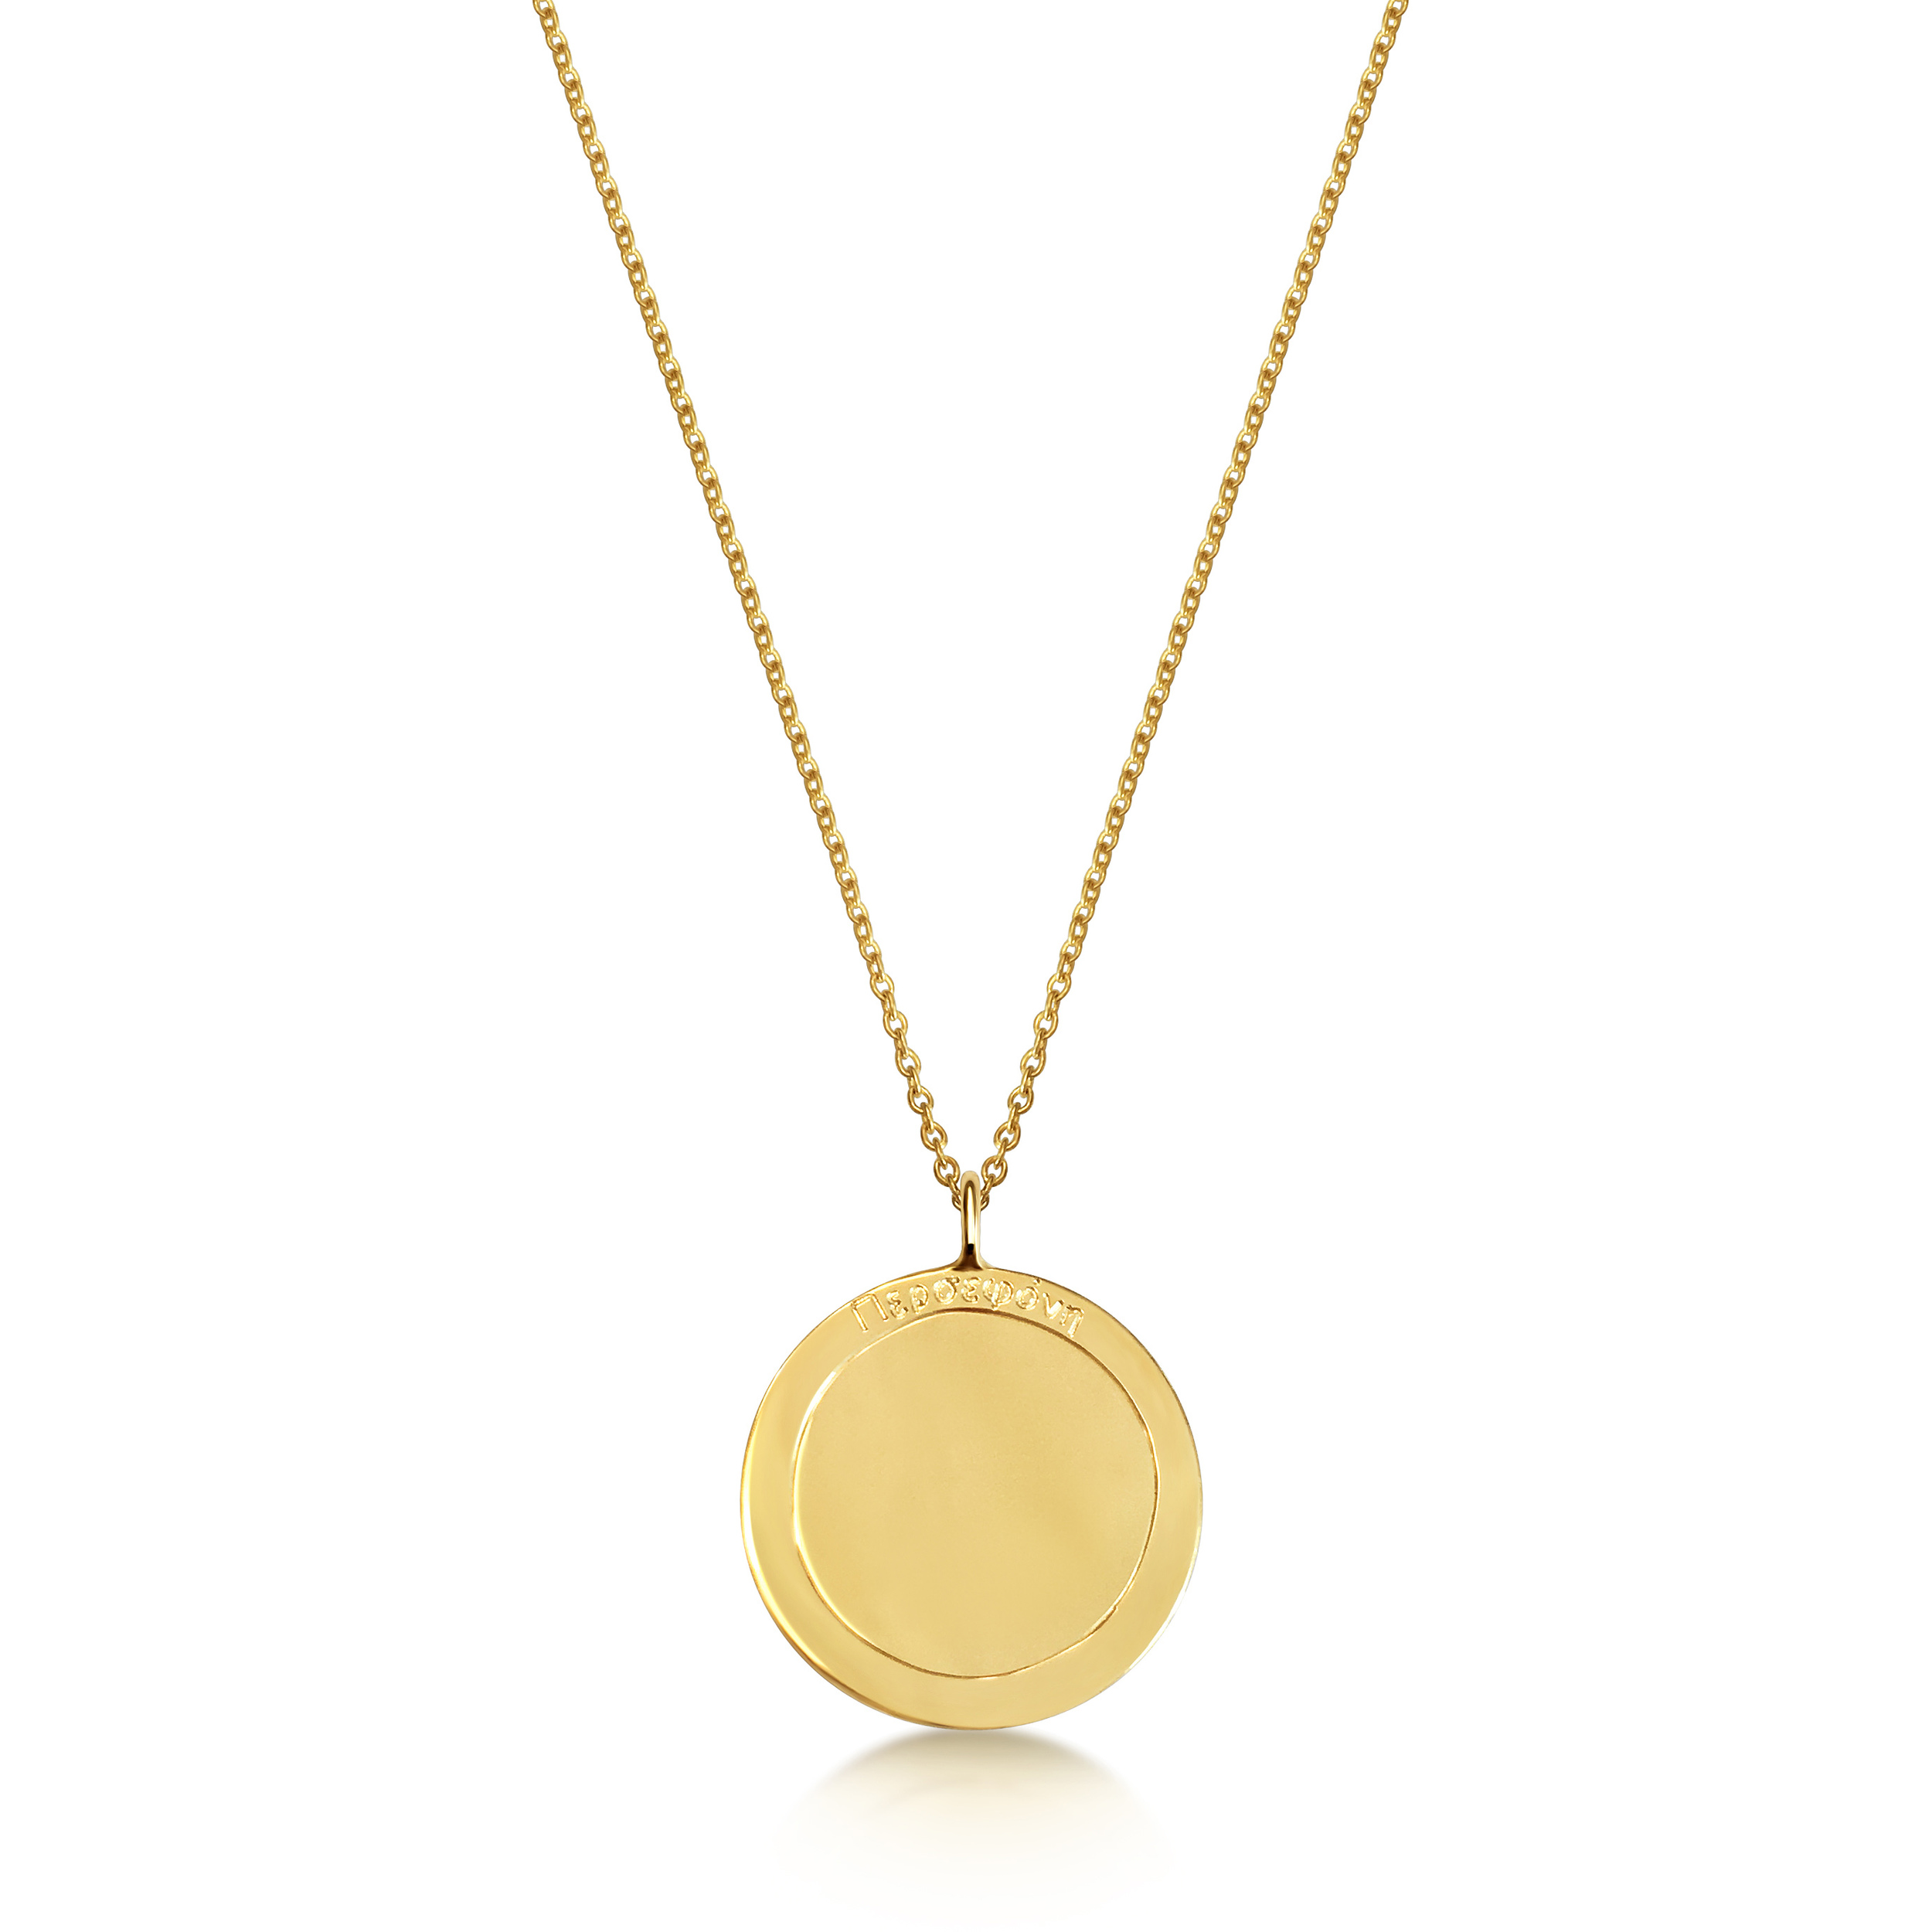 Bespoke-9ct-yellow-gold-disc-pendant-with-hand-engraved-pomegranate-3.jpg